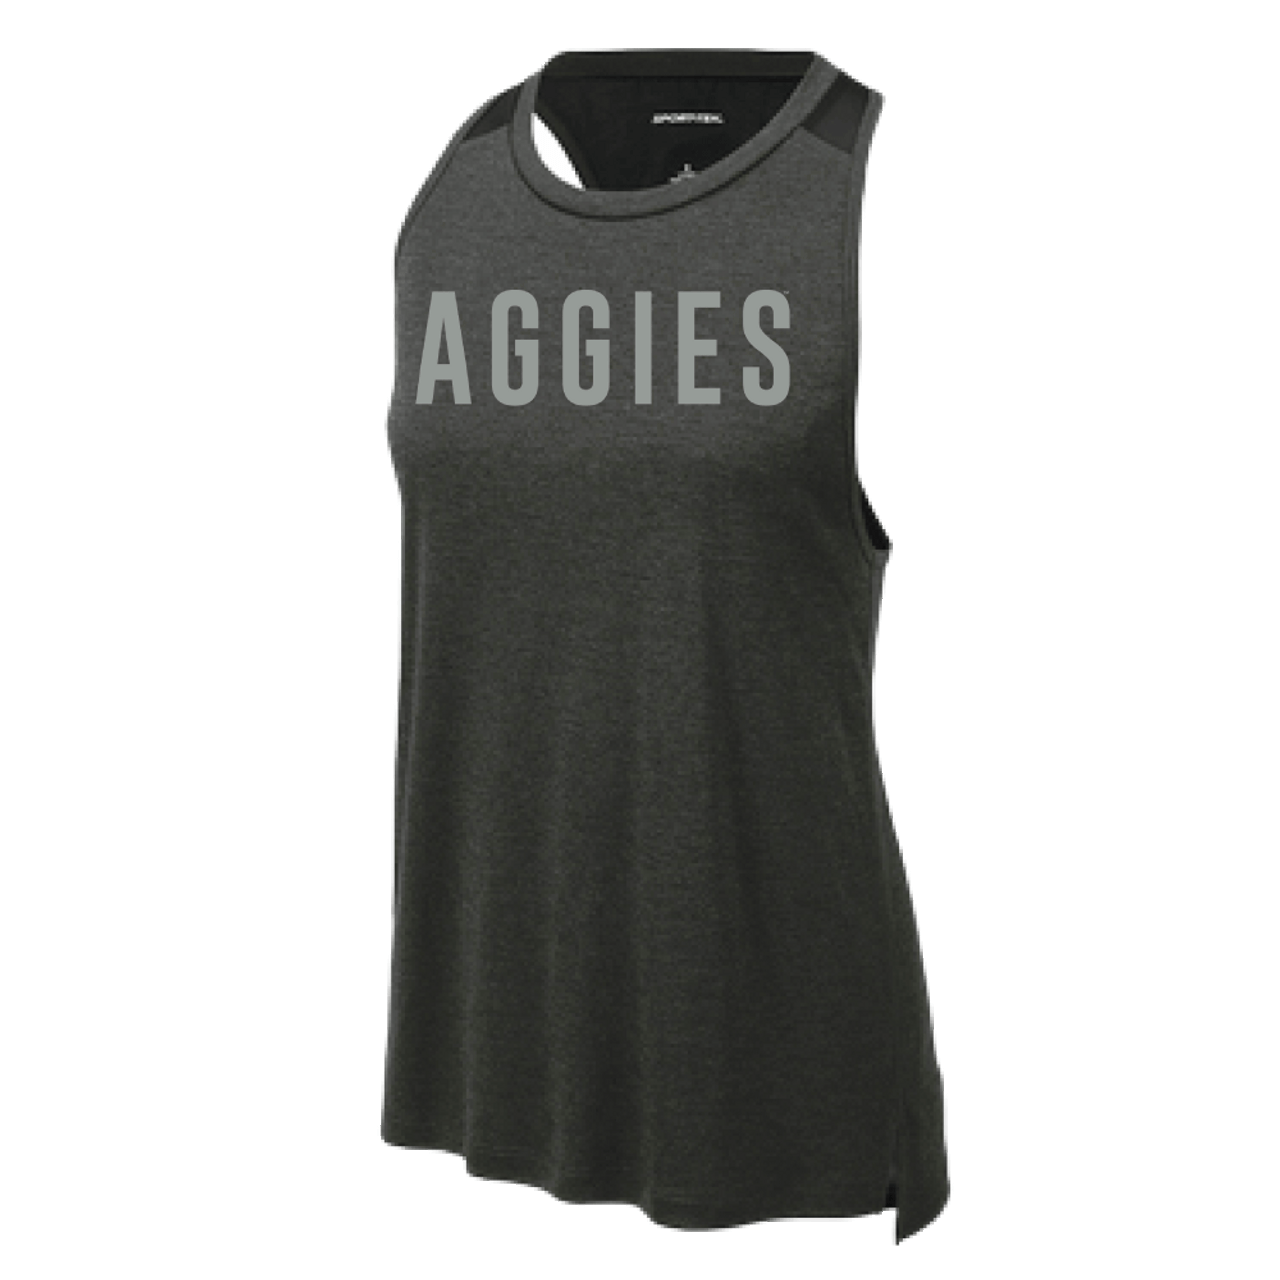 Aggies Endeavor Tank - Heather Black - The Warehouse at C.C. Creations